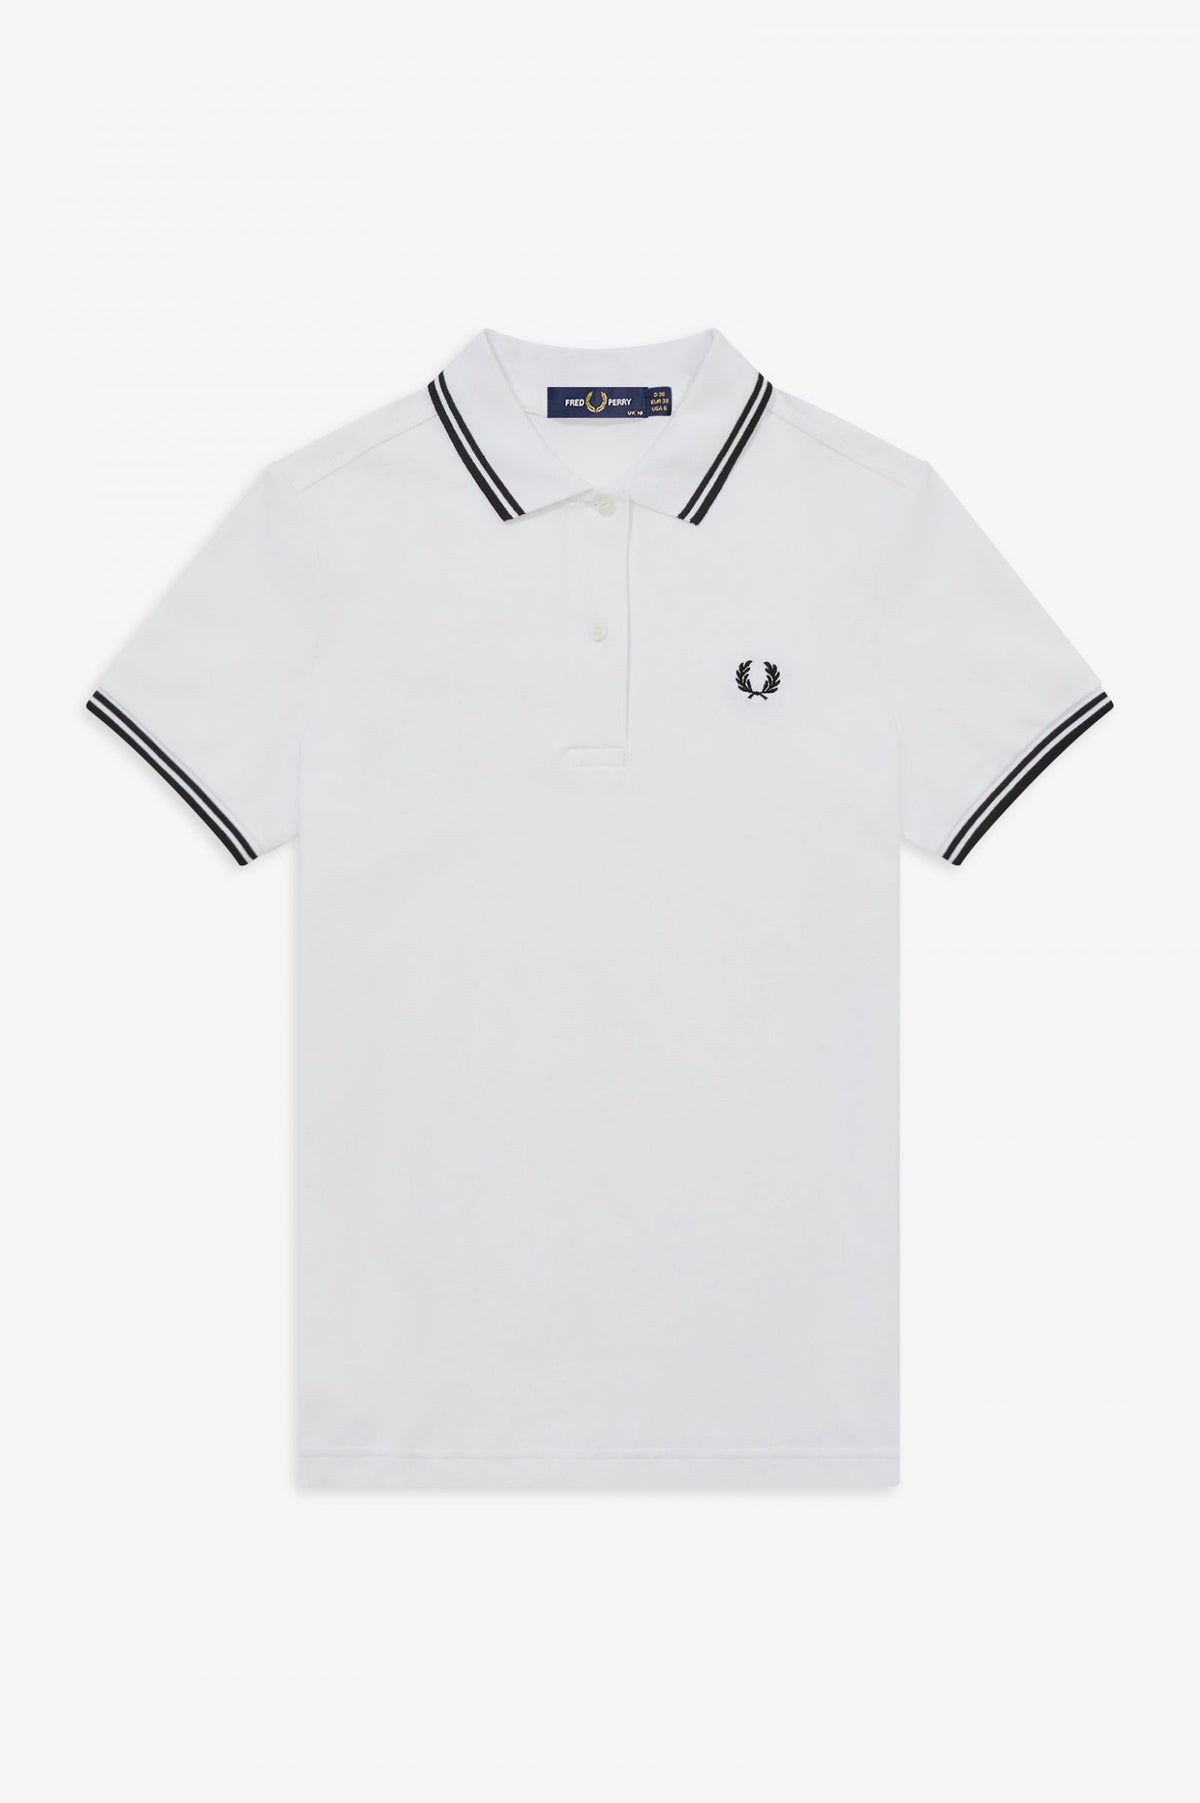 THE FRED PERRY SHIRT G3600 - WHITE